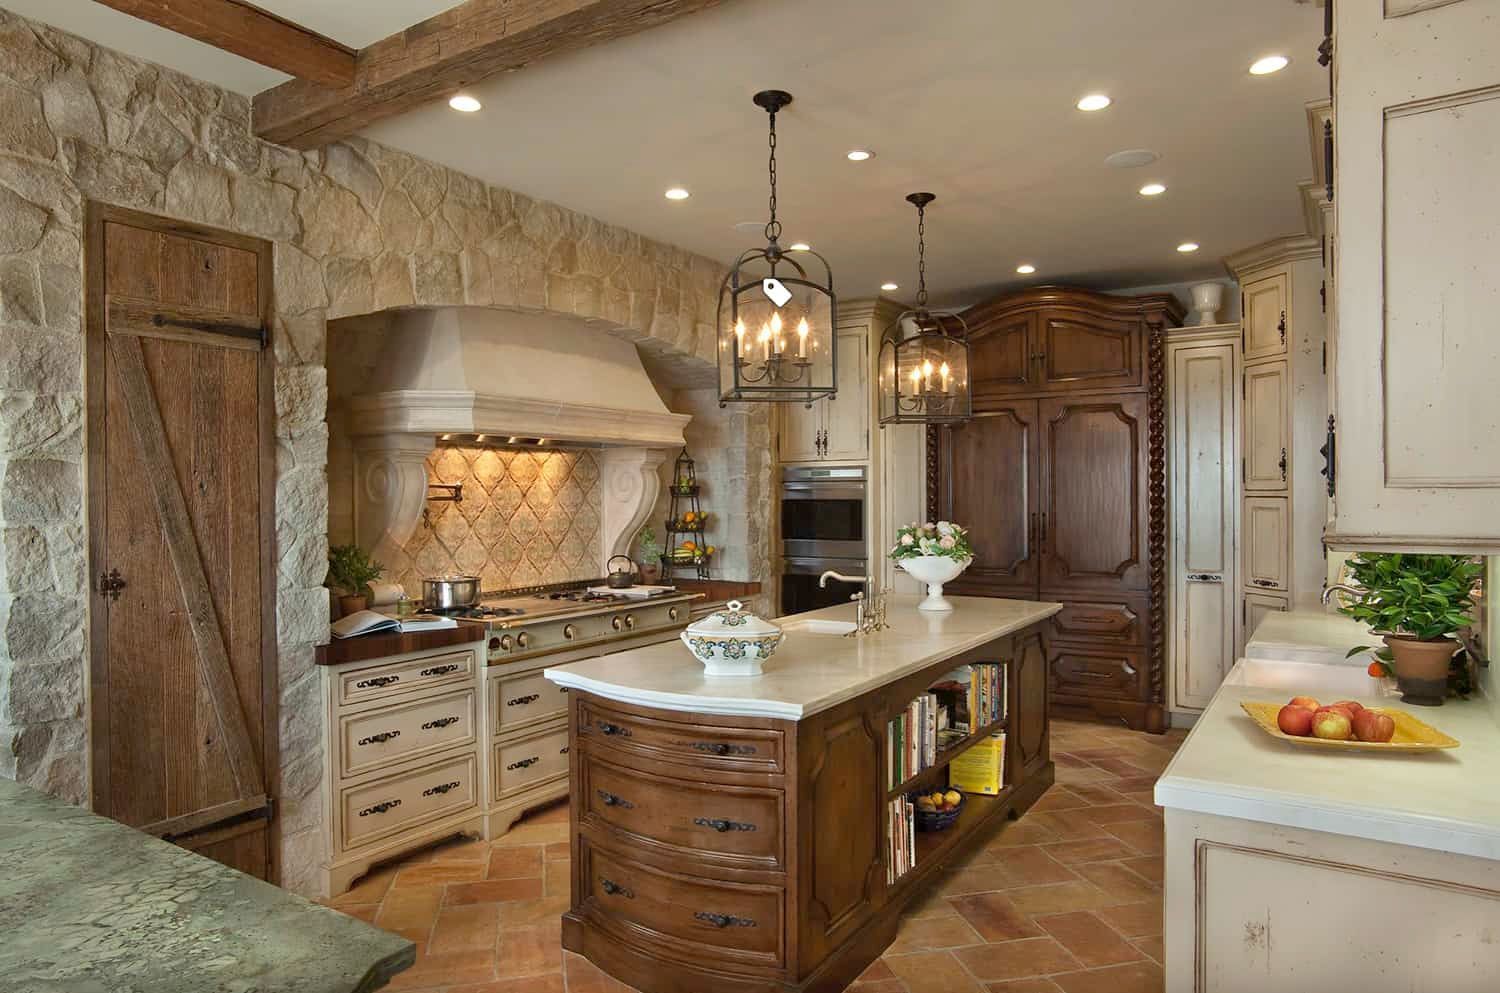 a kitchen with a stone countertop